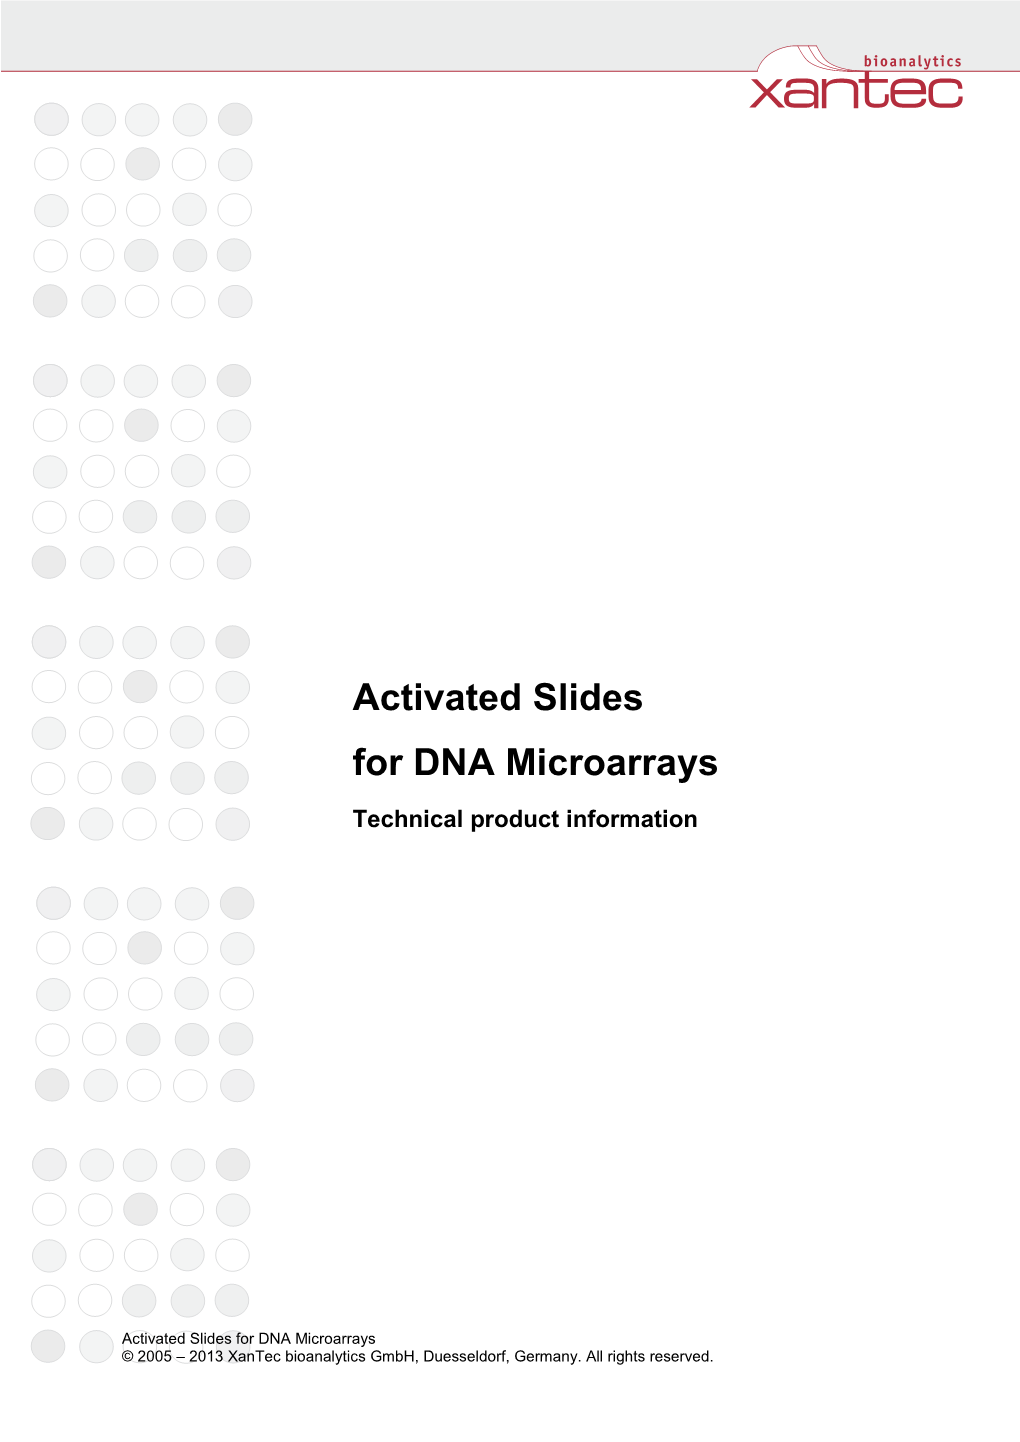 Activated Slides for DNA Microarrays Technical Product Information